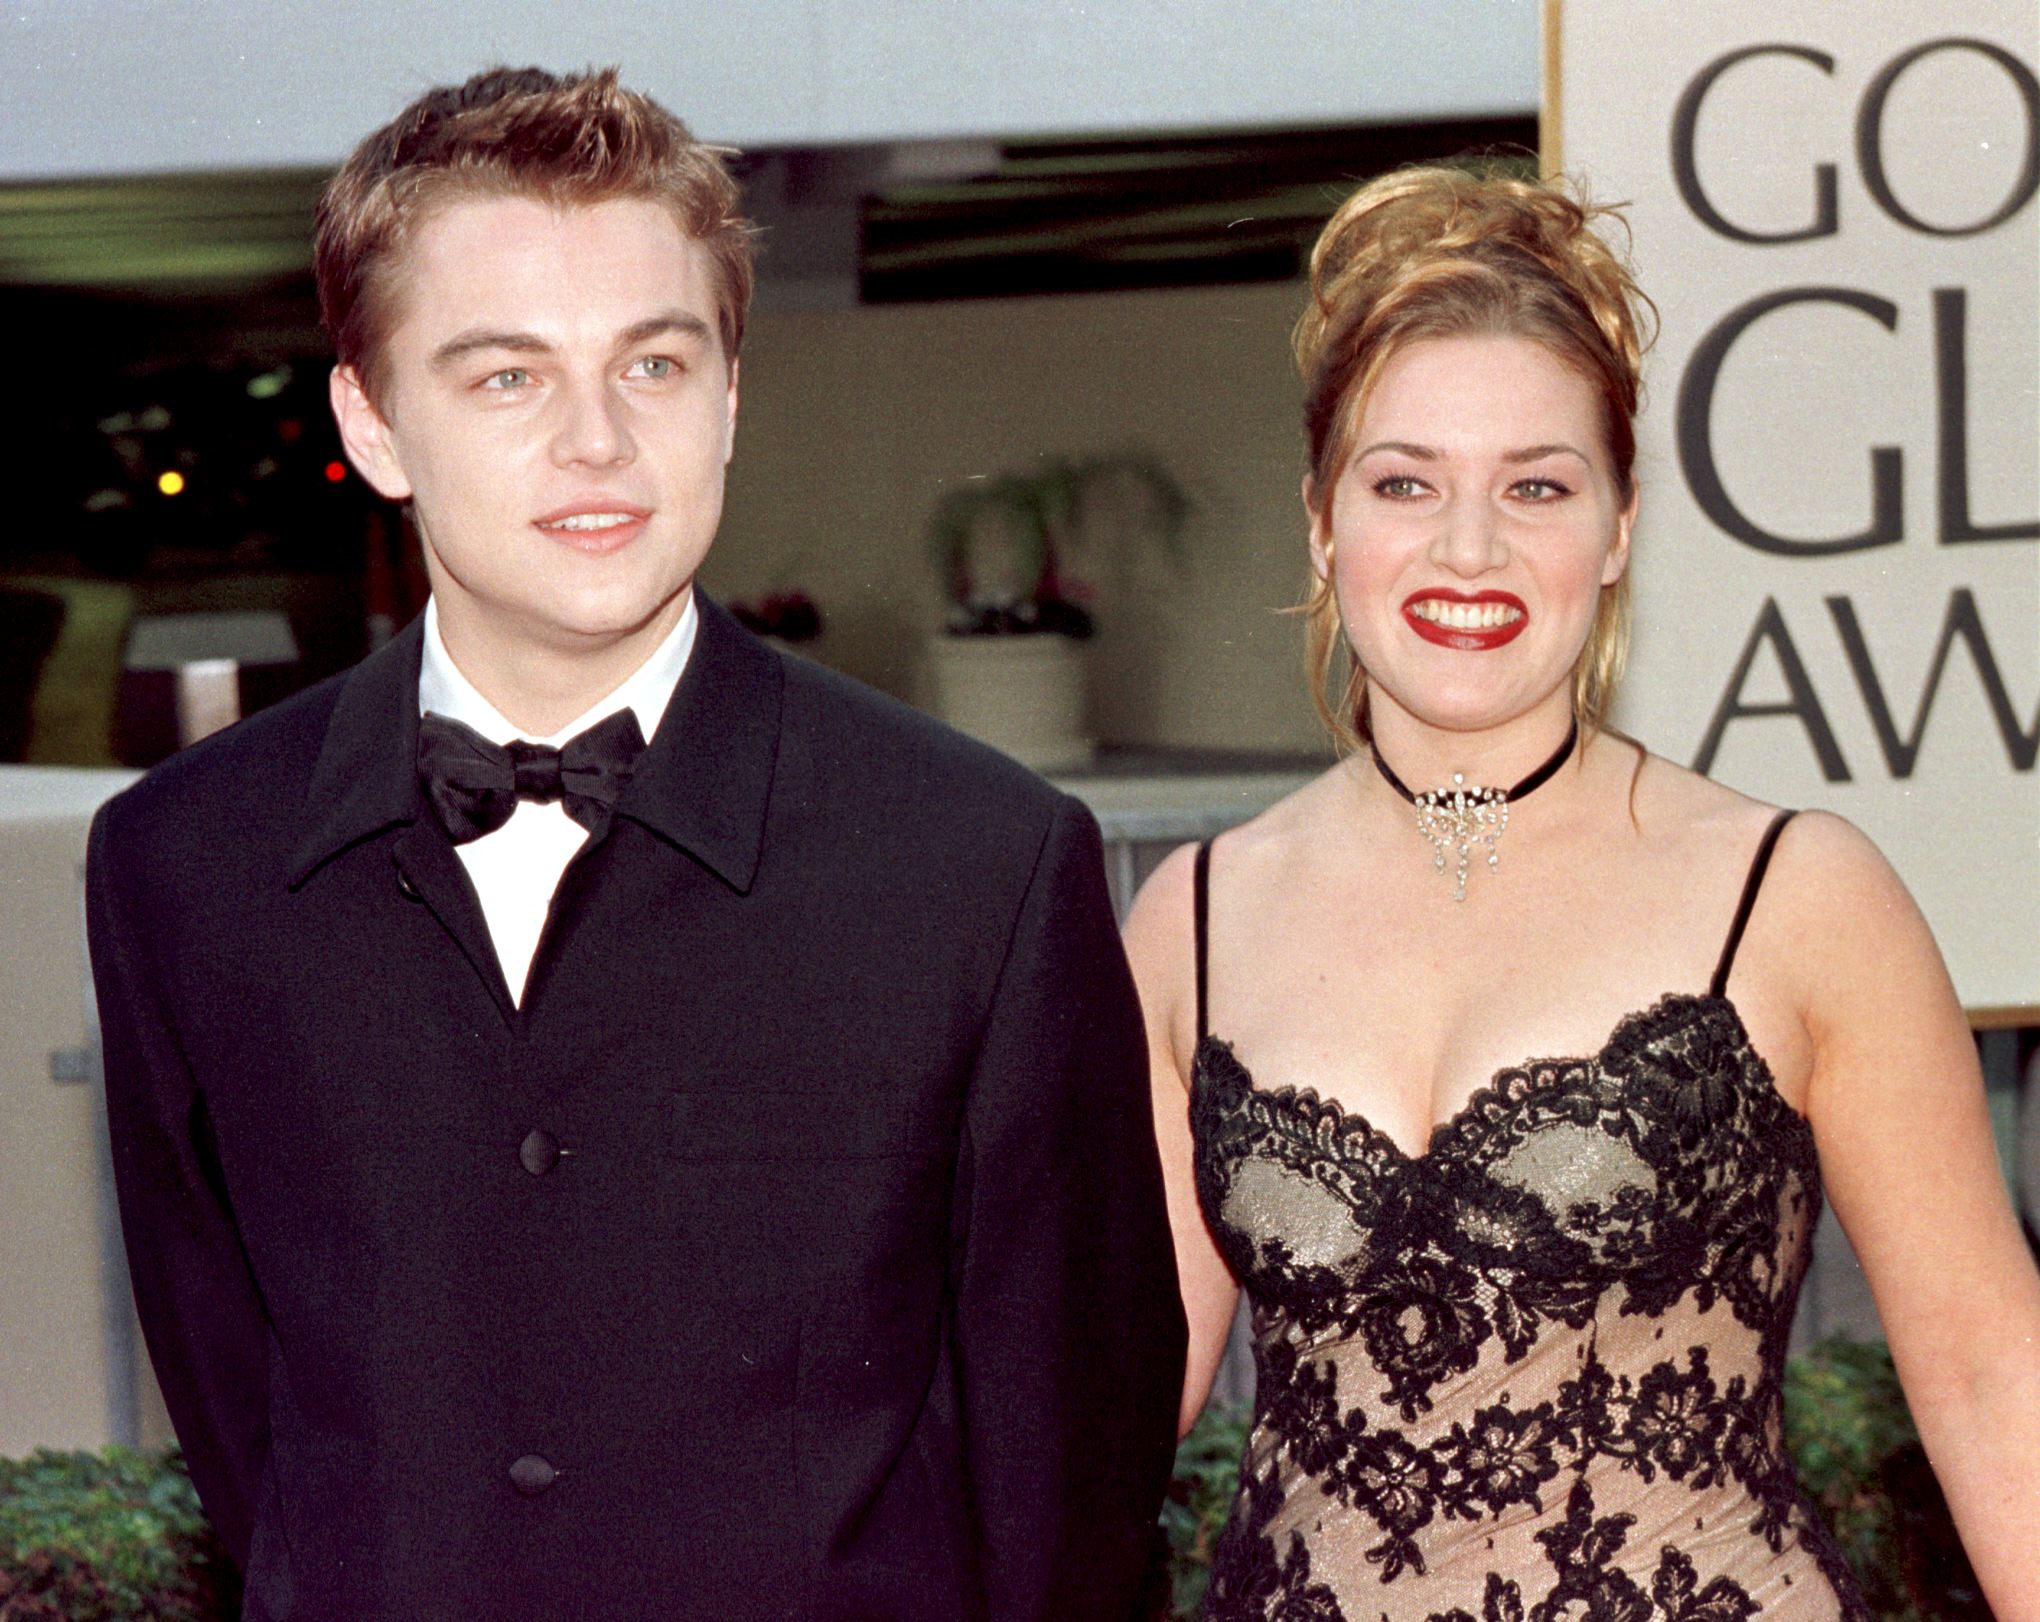 Leonardo DiCaprio Grossed Out Kate Winslet While Filming 'Titanic'